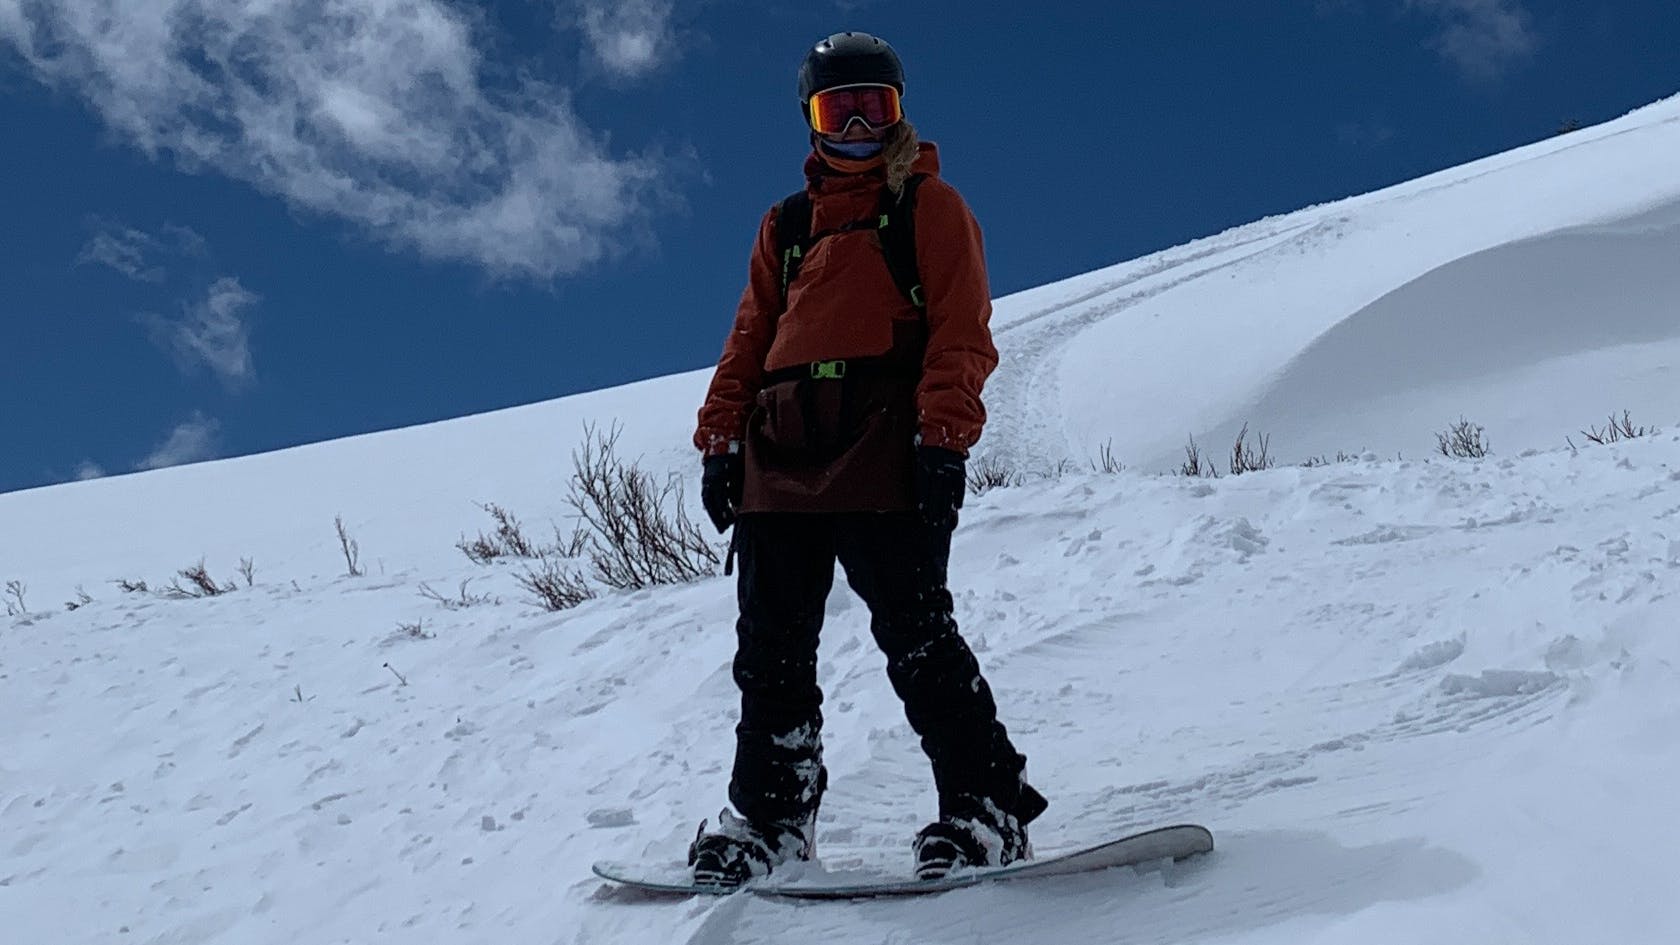 A woman on a snowboard stands perpendicular to the snowy slope she's on. The sky behind her is a dark blue.